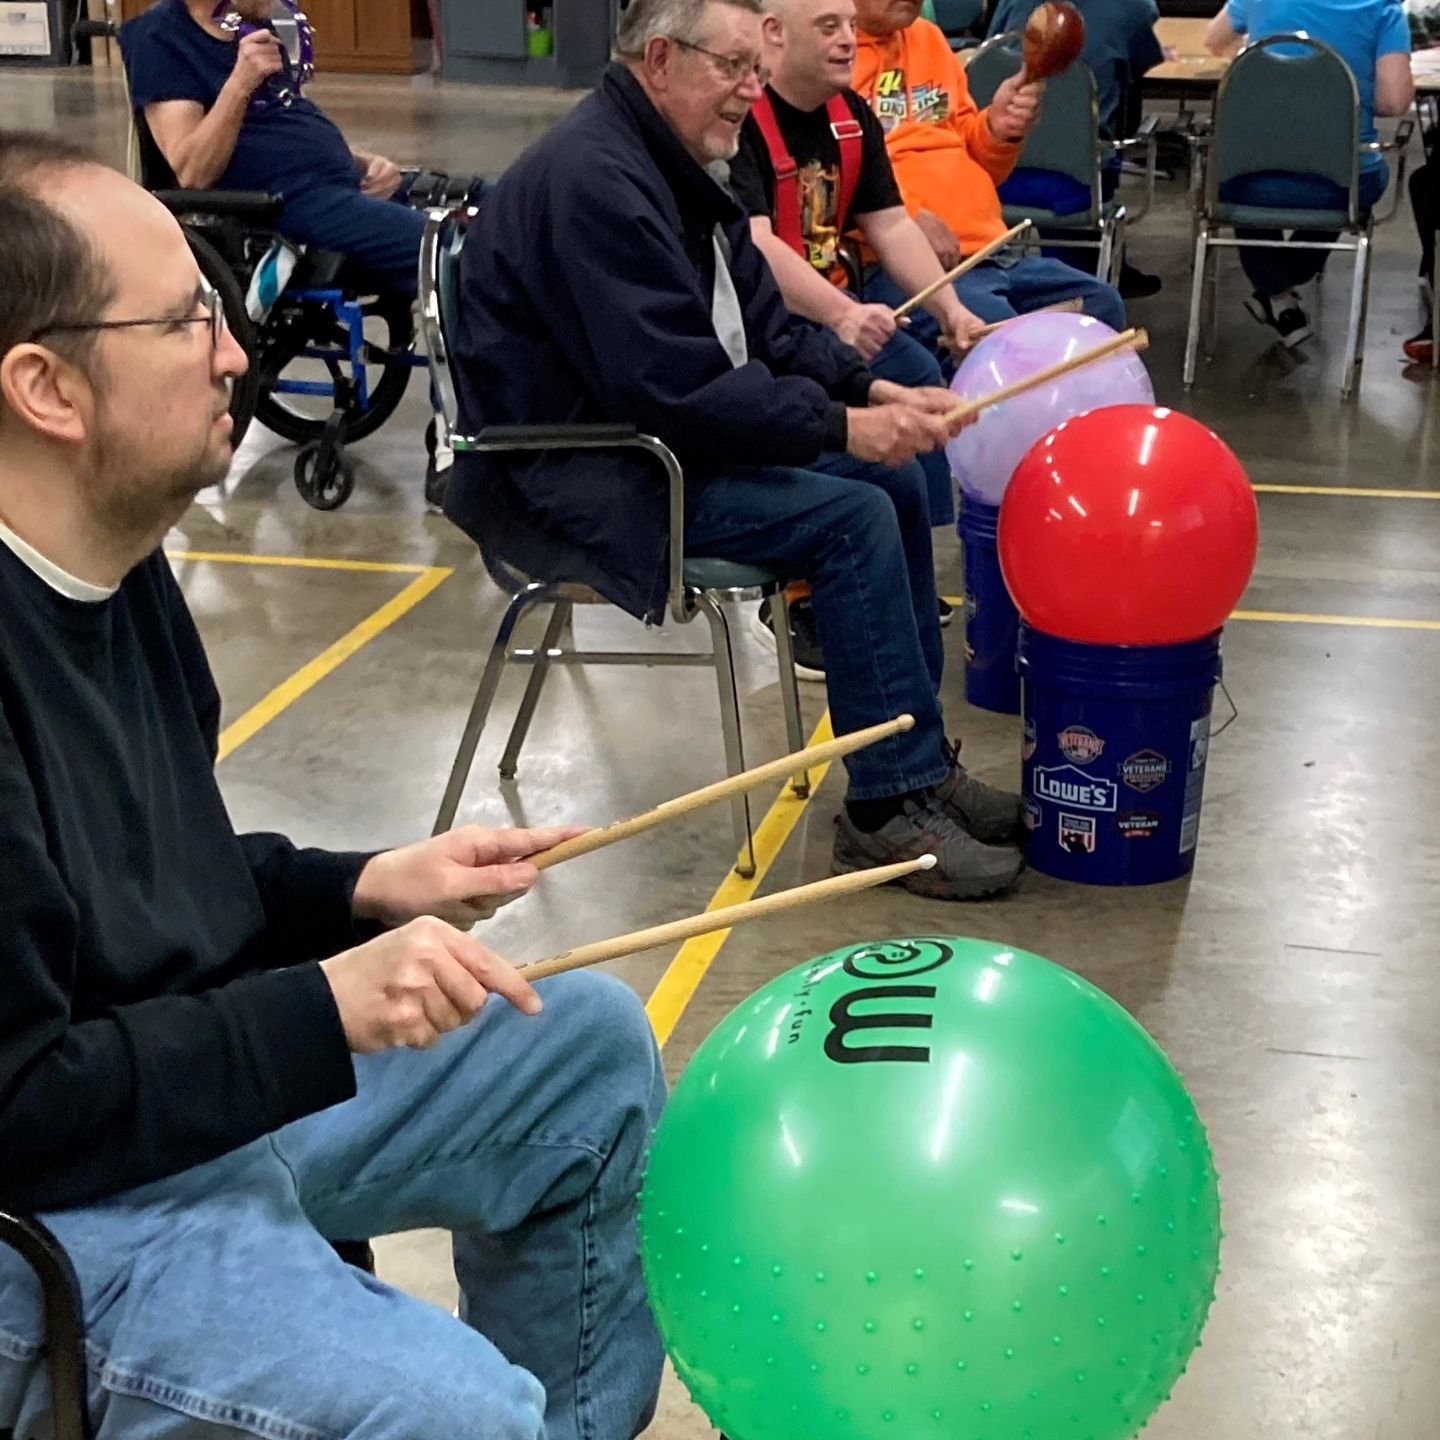 We tried something new - Cardio Drumming! It's a form of exercise that uses drumming movements. All you need are drumsticks, an exercise ball, and upbeat music. It's a great way to relieve stress and stay fit while having fun!